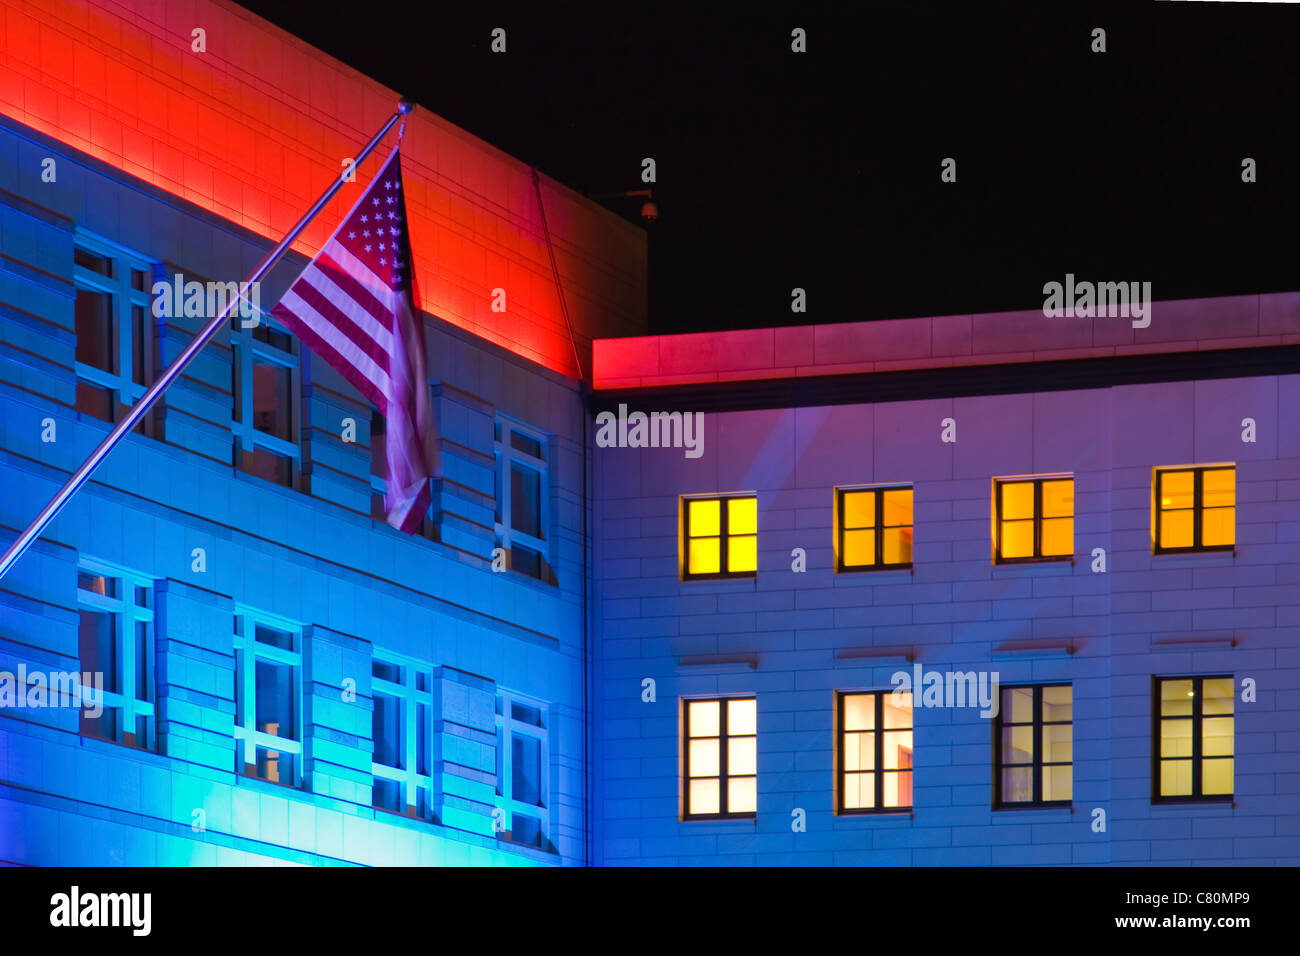 Image taken at night of the American embassy during the Festival of Lights in Berlin in October 2010. Stock Photo